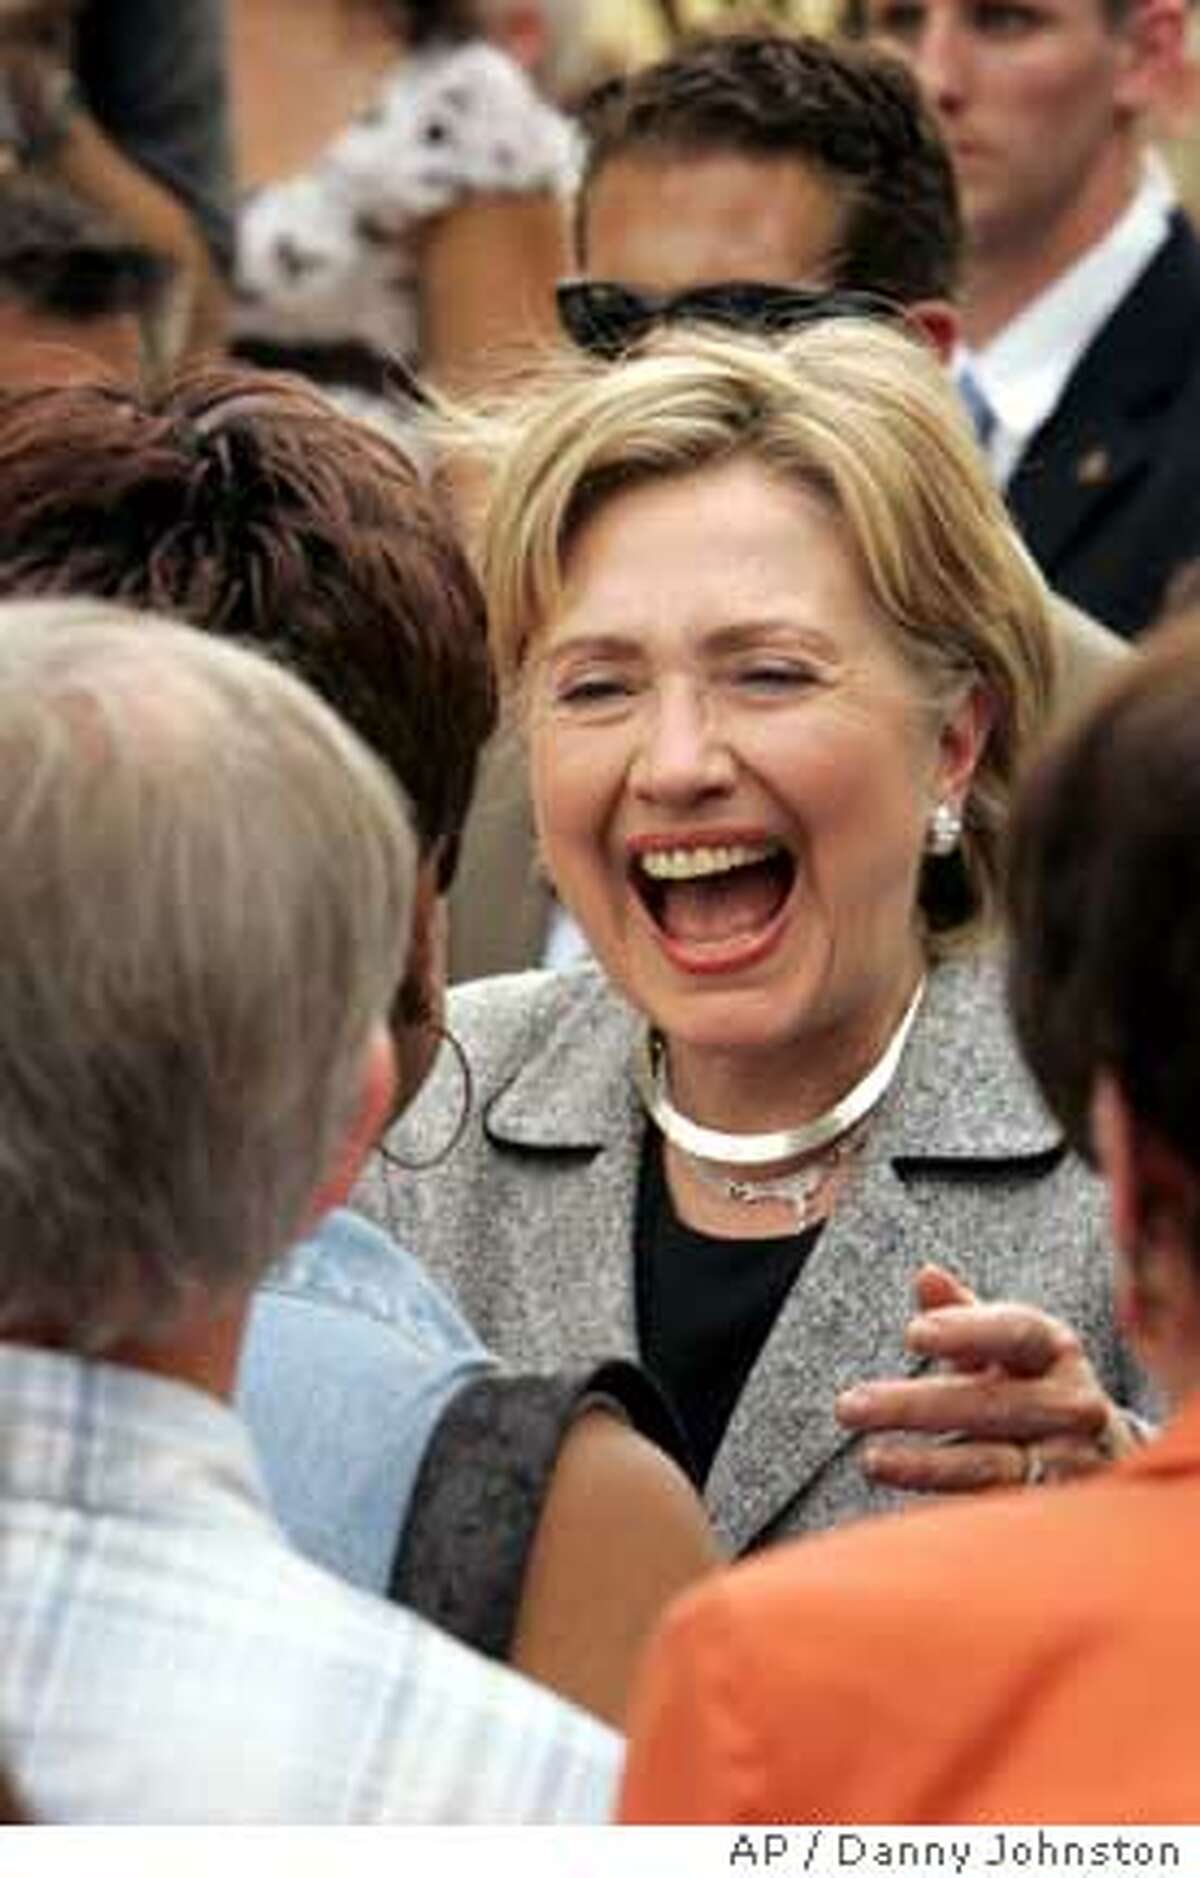 Democratic presidential hopeful U.S. Sen. Hillary Rodham Clinton, D-N.Y., greets supporters in Little Rock, Ark., Monday, Aug. 20, 2007, after Arkansas Gov. Mike Beebe endorsed her campaign. (AP Photo/Danny Johnston)